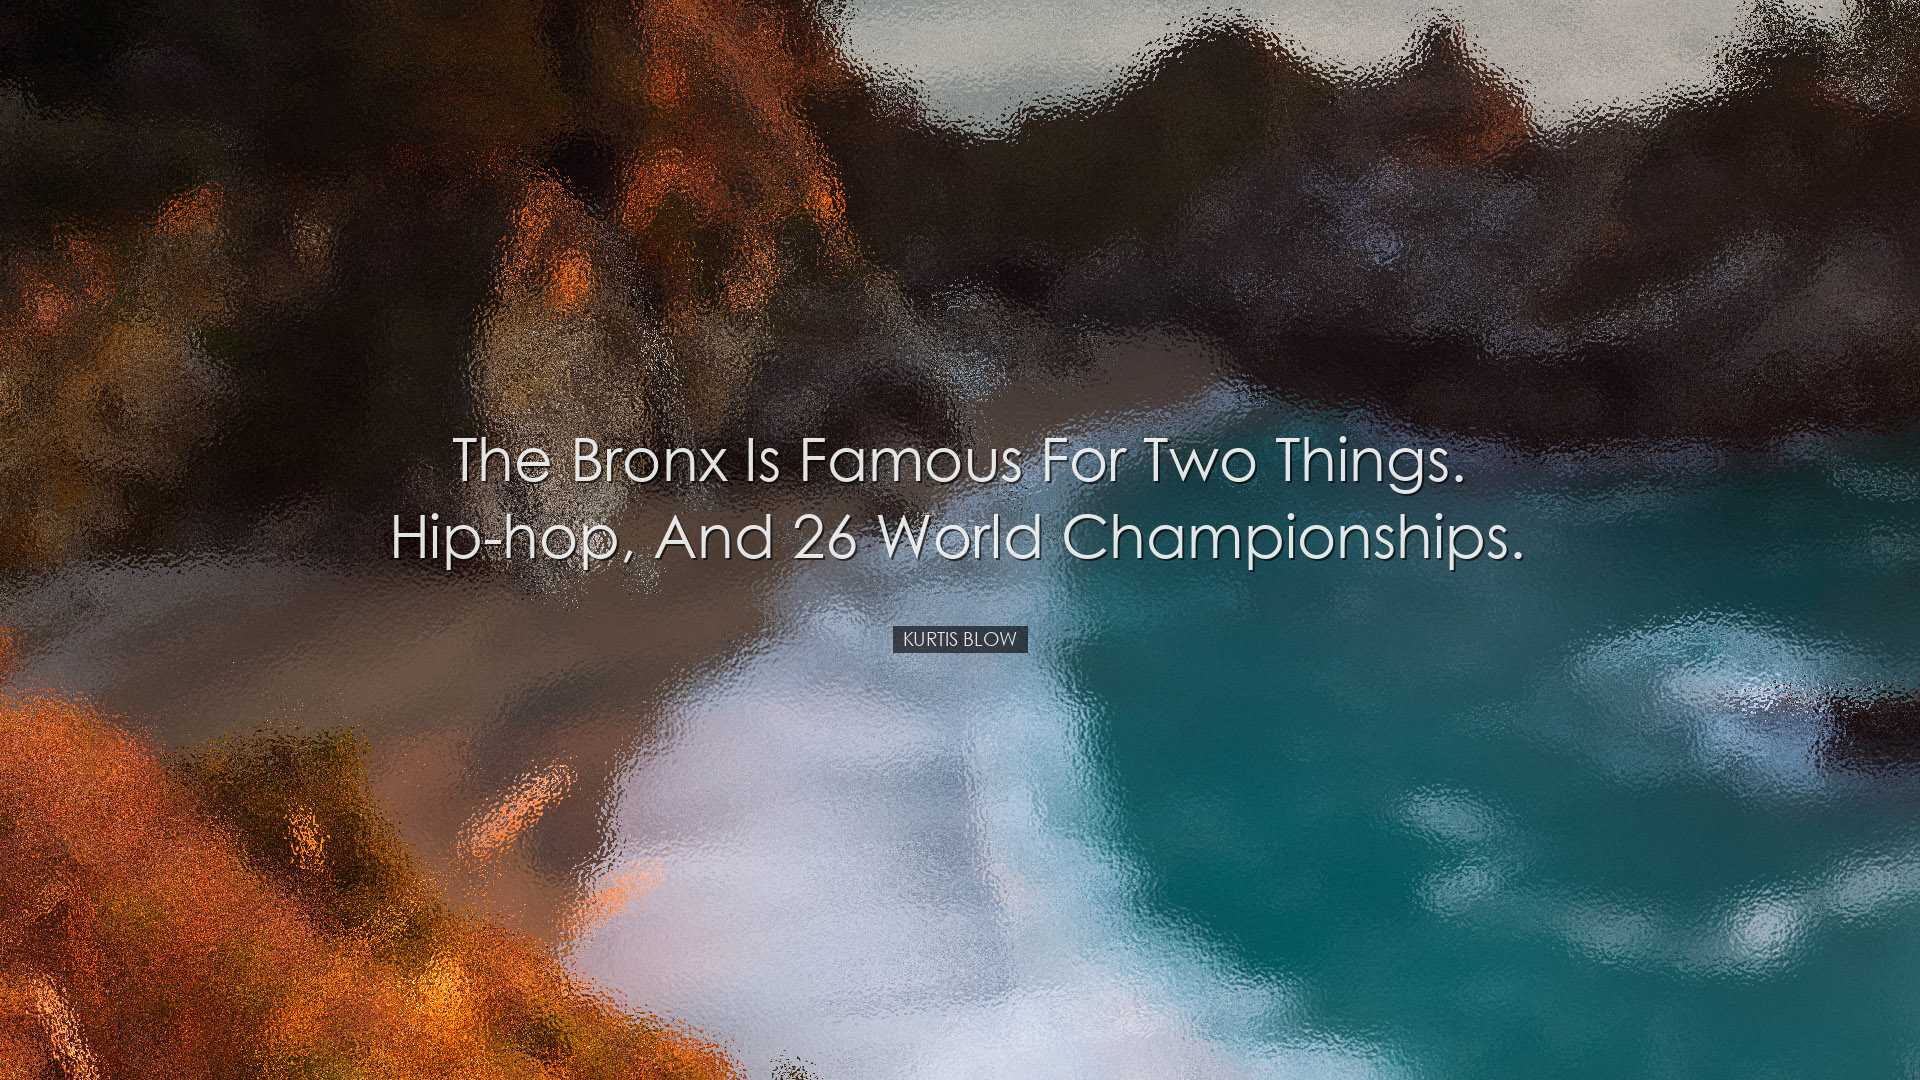 The Bronx is famous for two things. Hip-hop, and 26 world champion